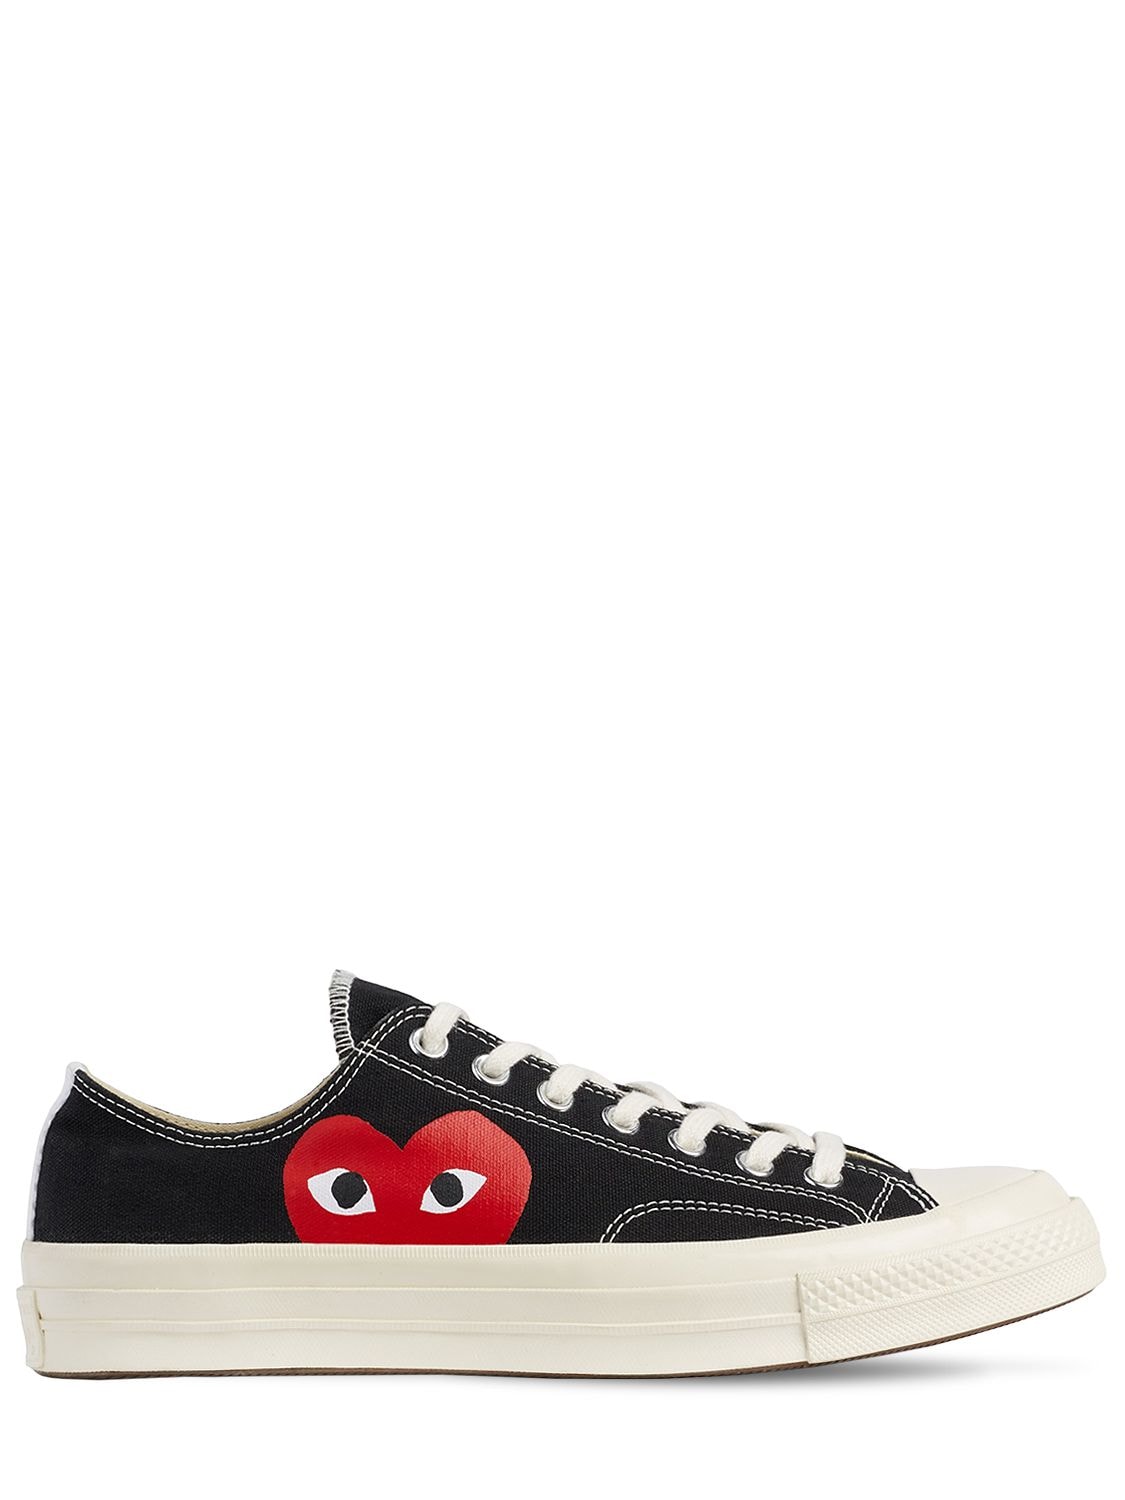 Comme Des Garçons Play 20mm Play Converse Cotton Sneakers In Black